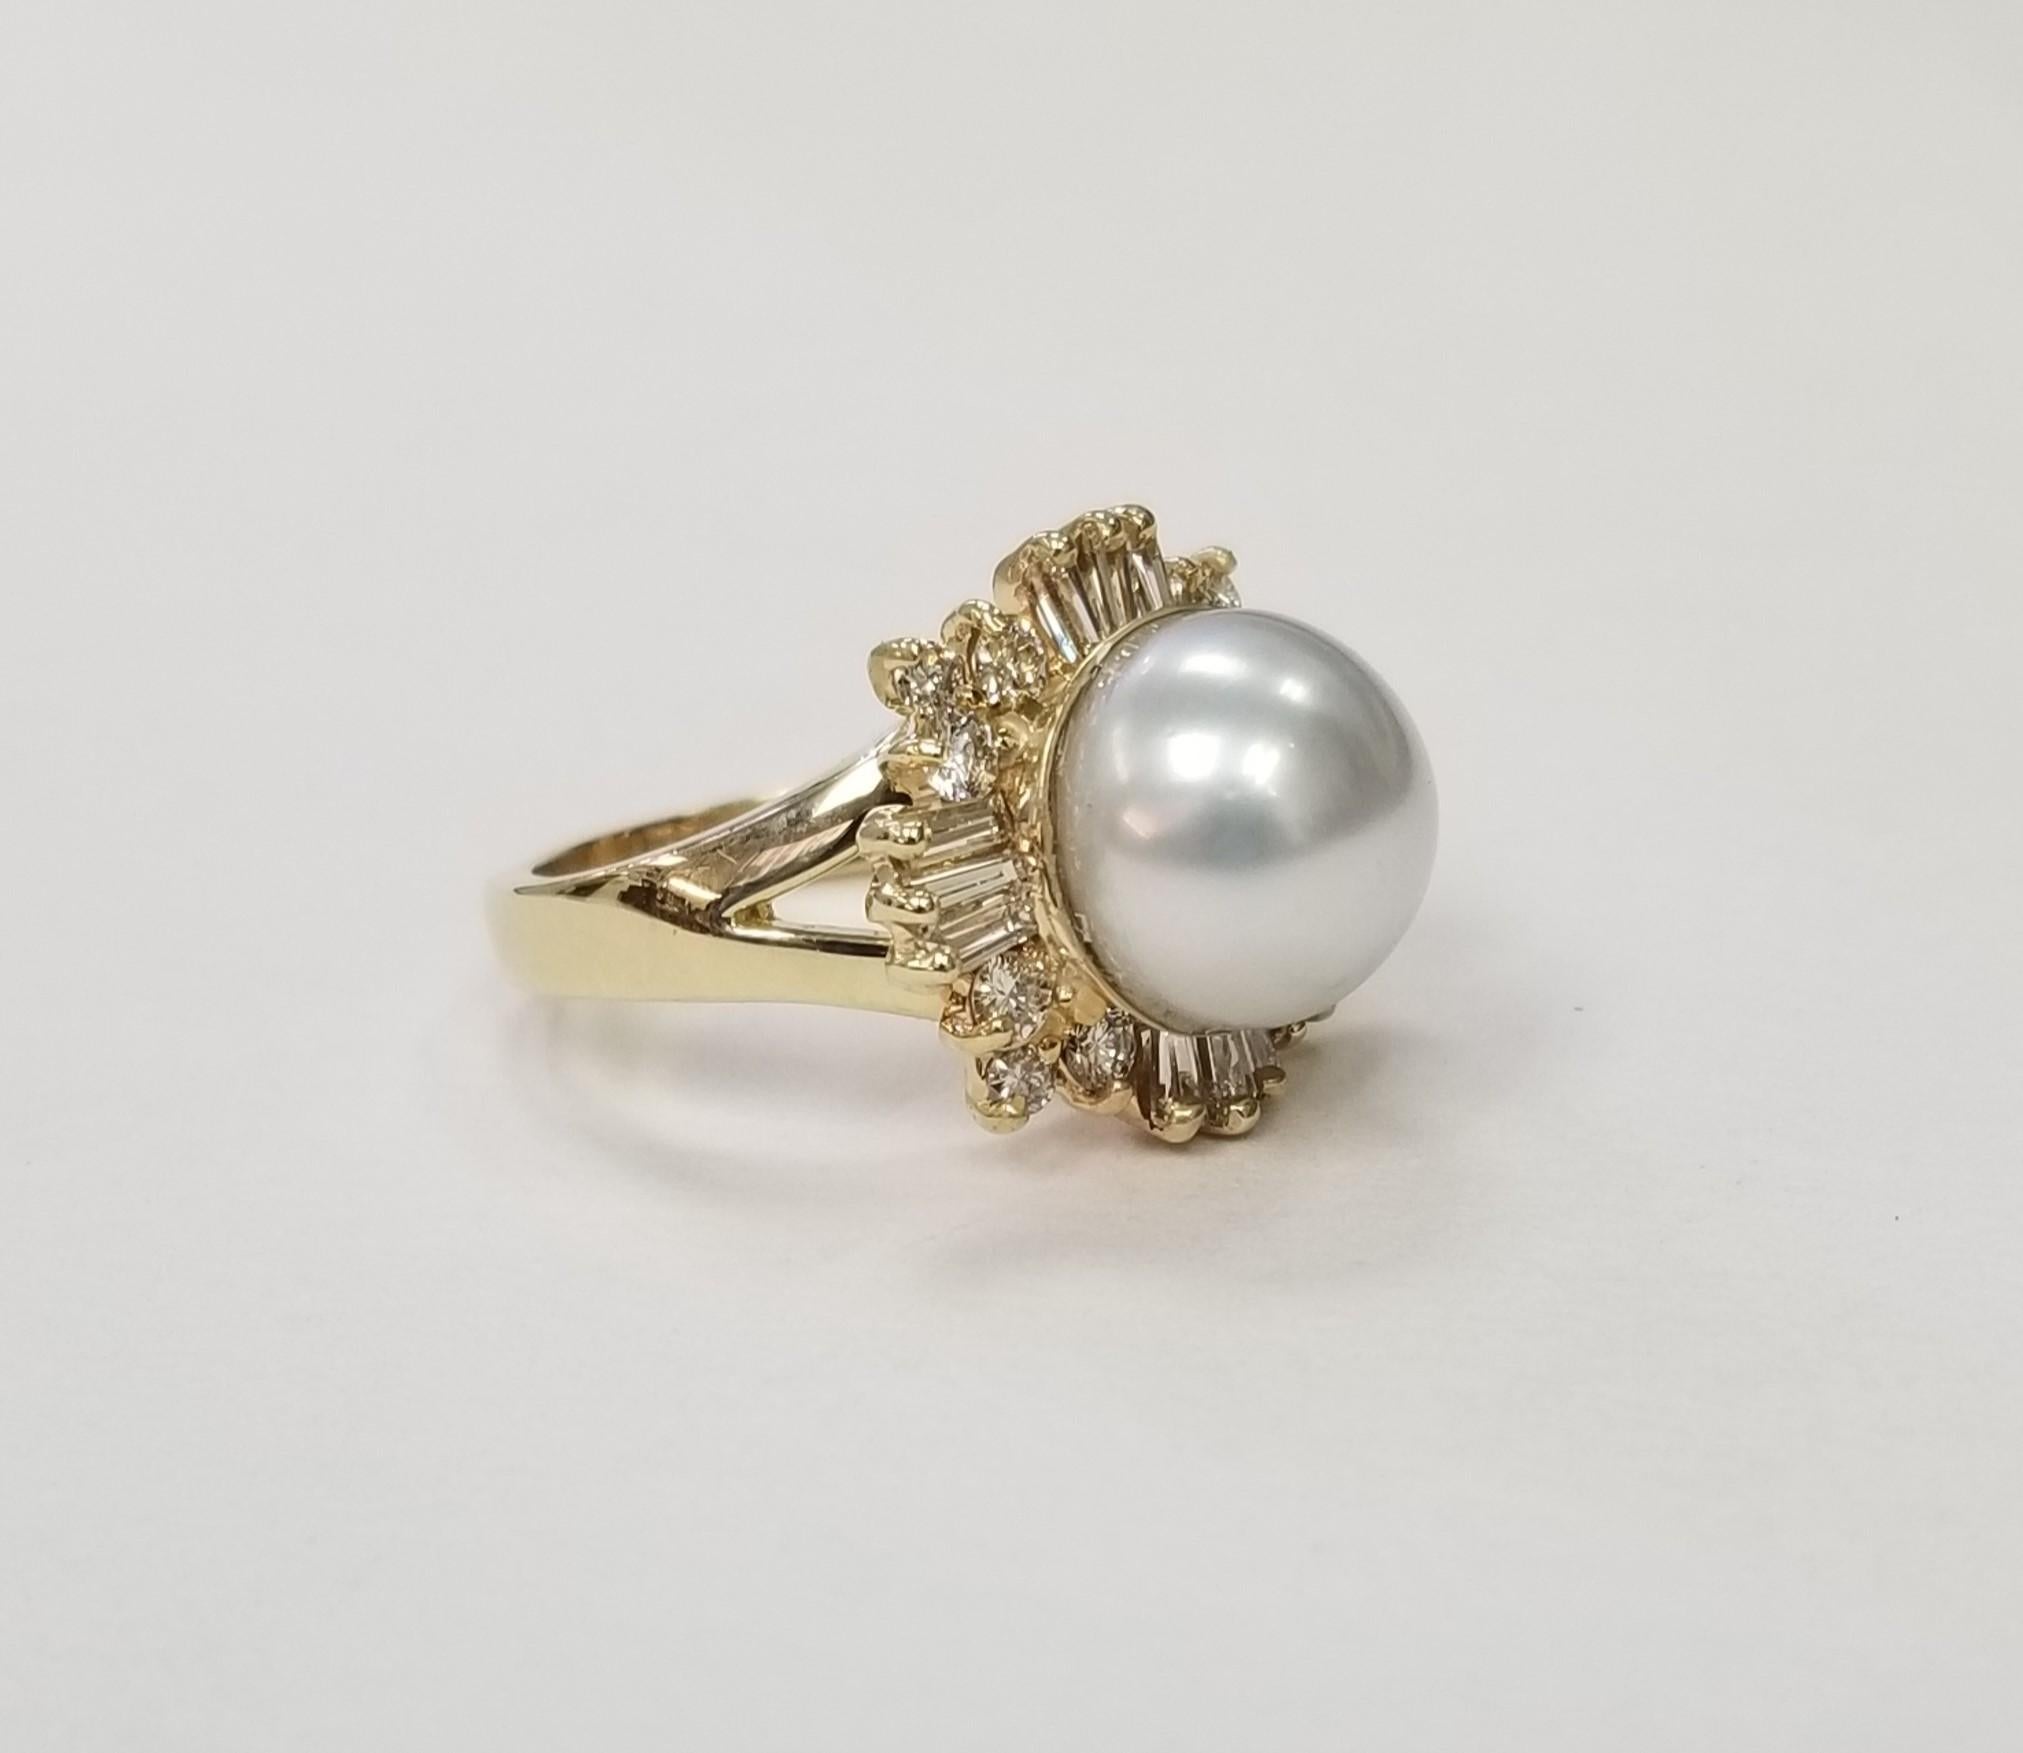 Gorgeous 14k yellow gold South Sea Pearl and Diamonds Ring.
*Motivated to Sell - Please make a Fair Offer*
Specifications:
    main stone: 11.50 mm South Sea Pearl
    diamonds: 24 round and baguette cut
    carat total weight: .70 CTW
    color: G
